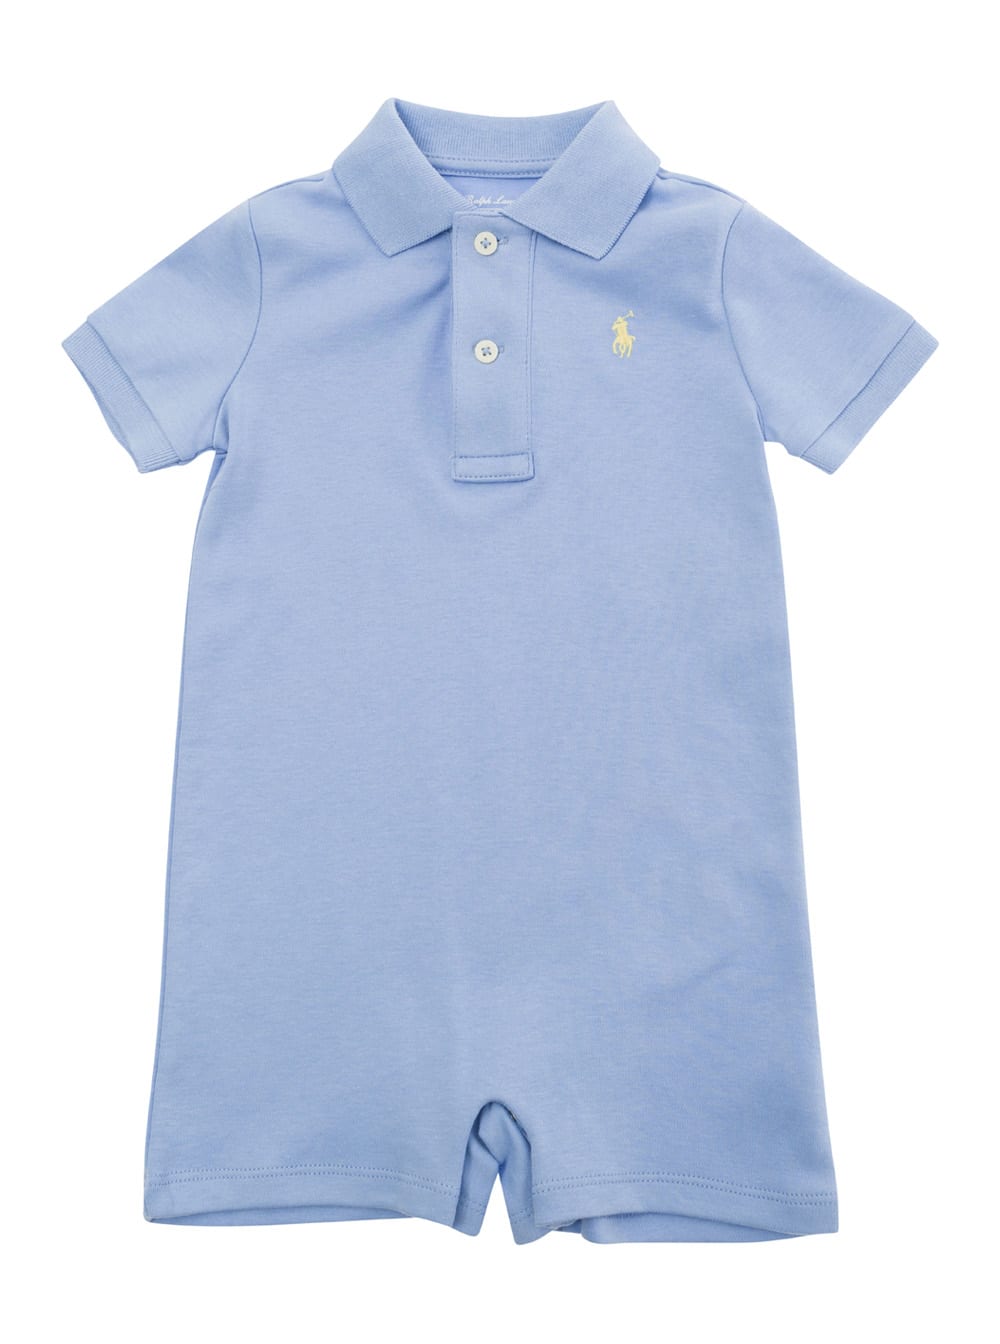 POLO RALPH LAUREN LIGHT BLUE DRESS WITH PONY EMBROIDERY IN COTTON BABY